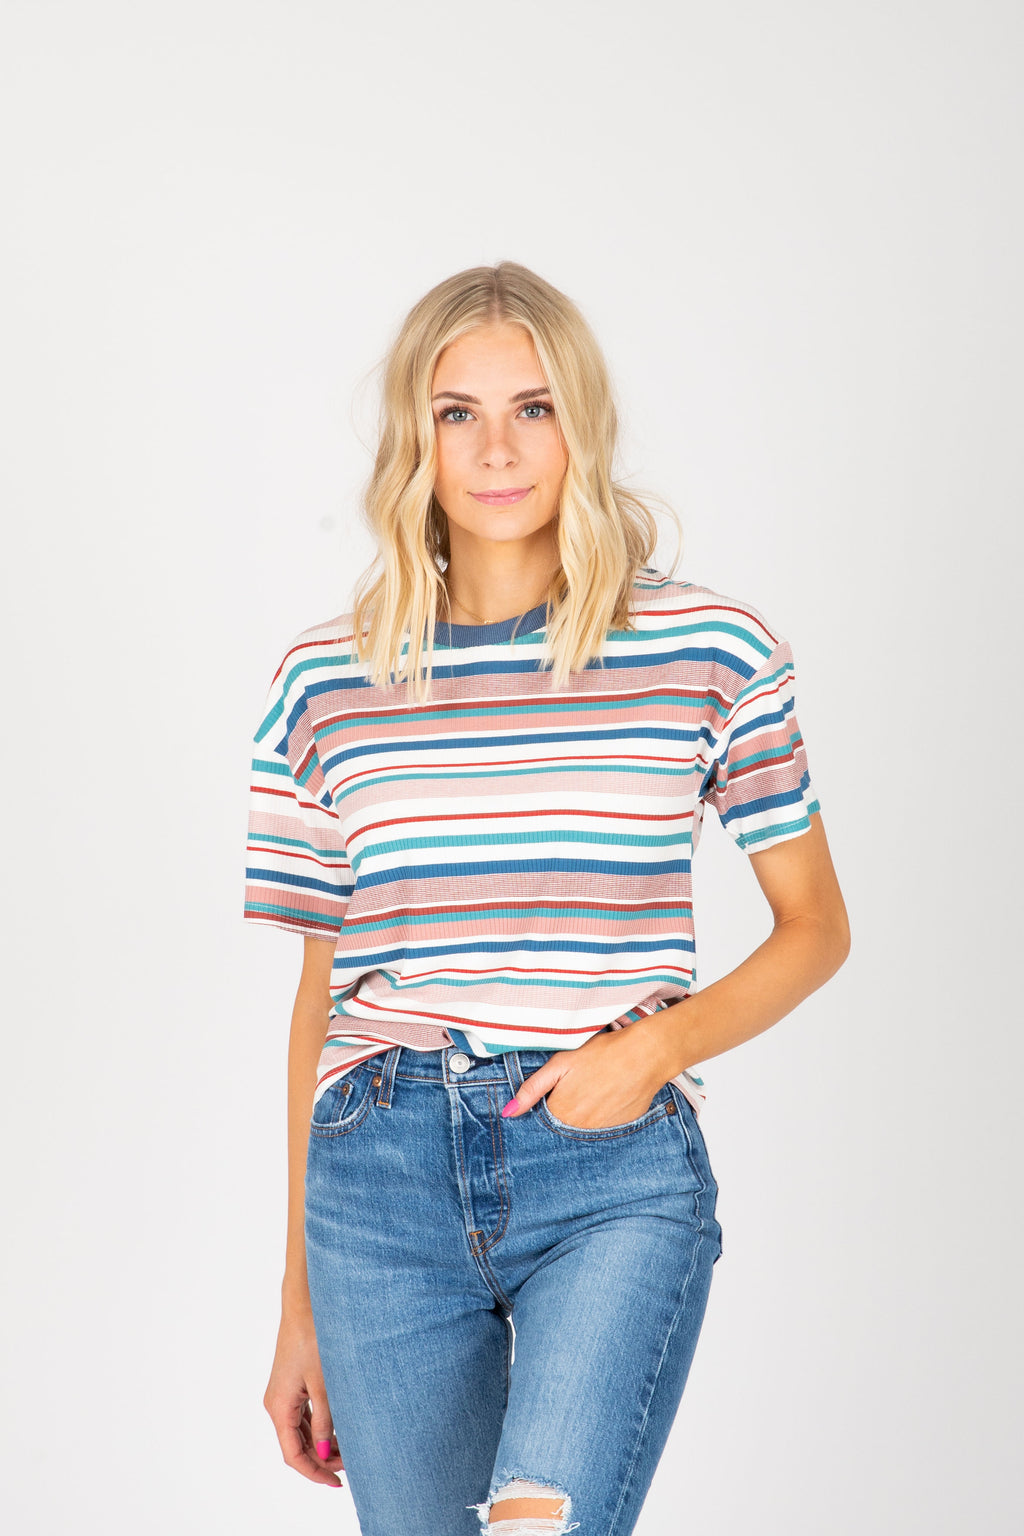 Piper & Scoot Shop | Trendy Womens Clothing Brand